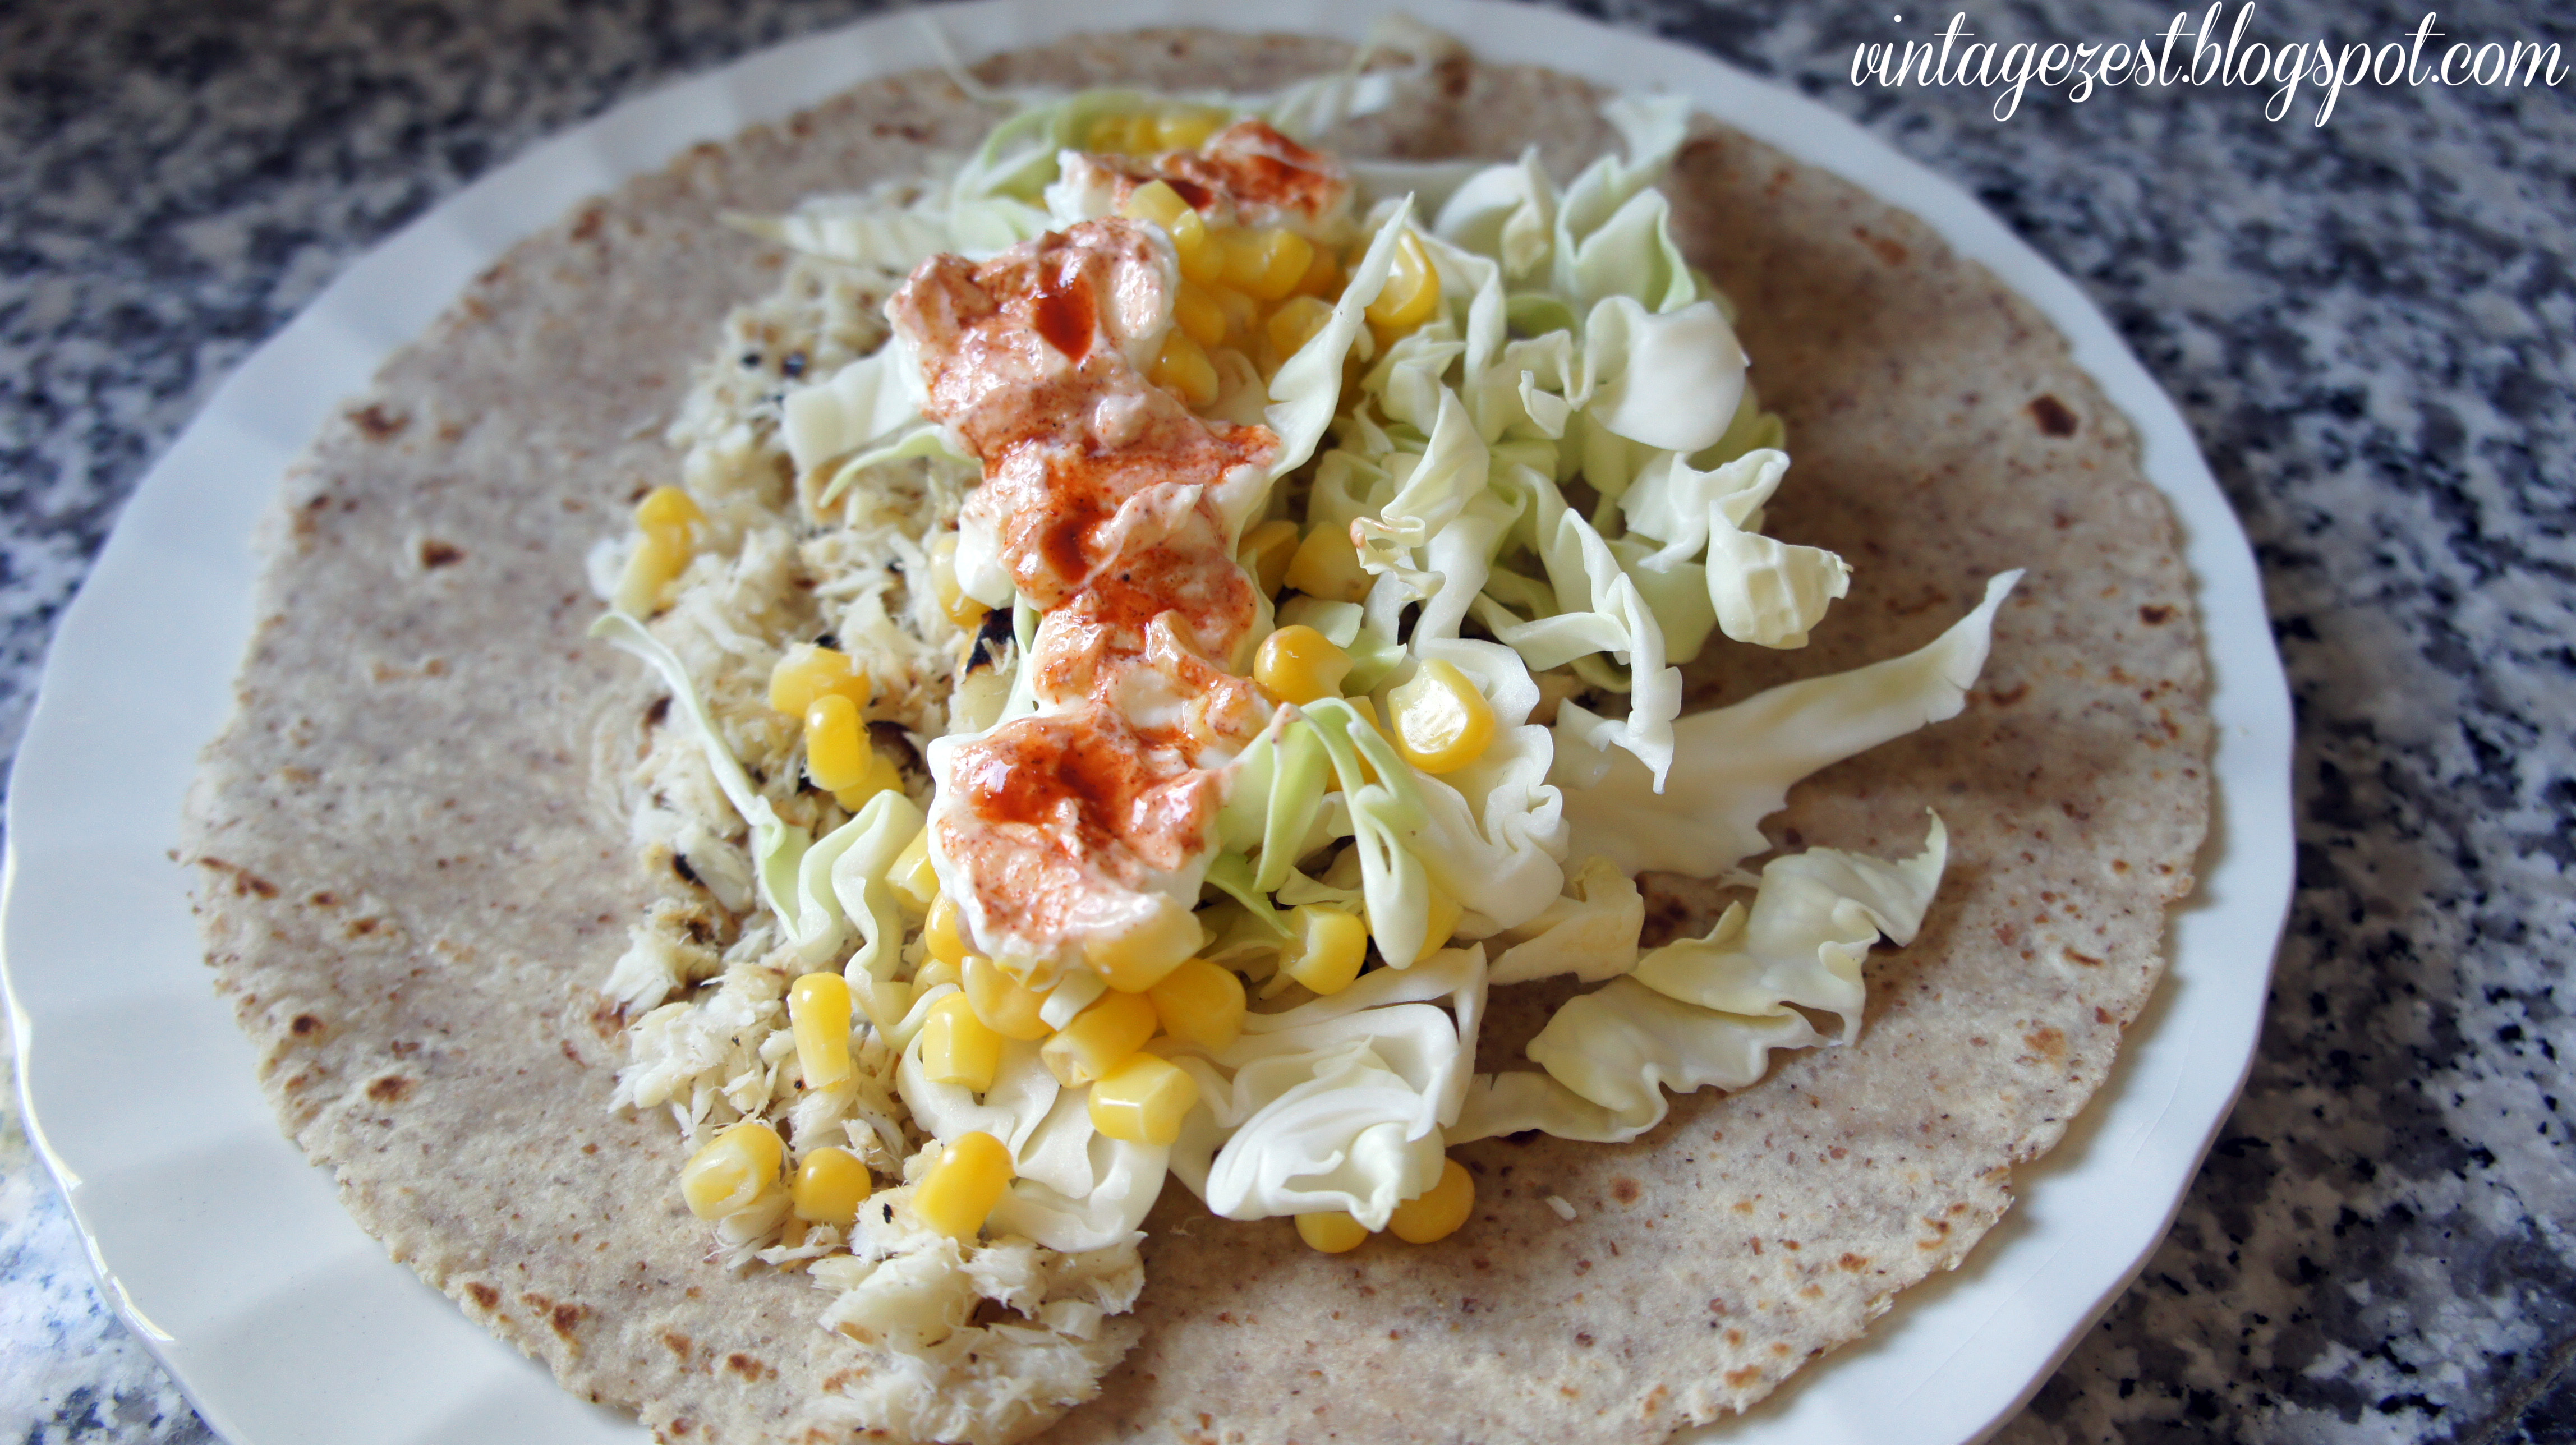 Fish Tacos with Chipotle Cream on Diane's Vintage Zest!